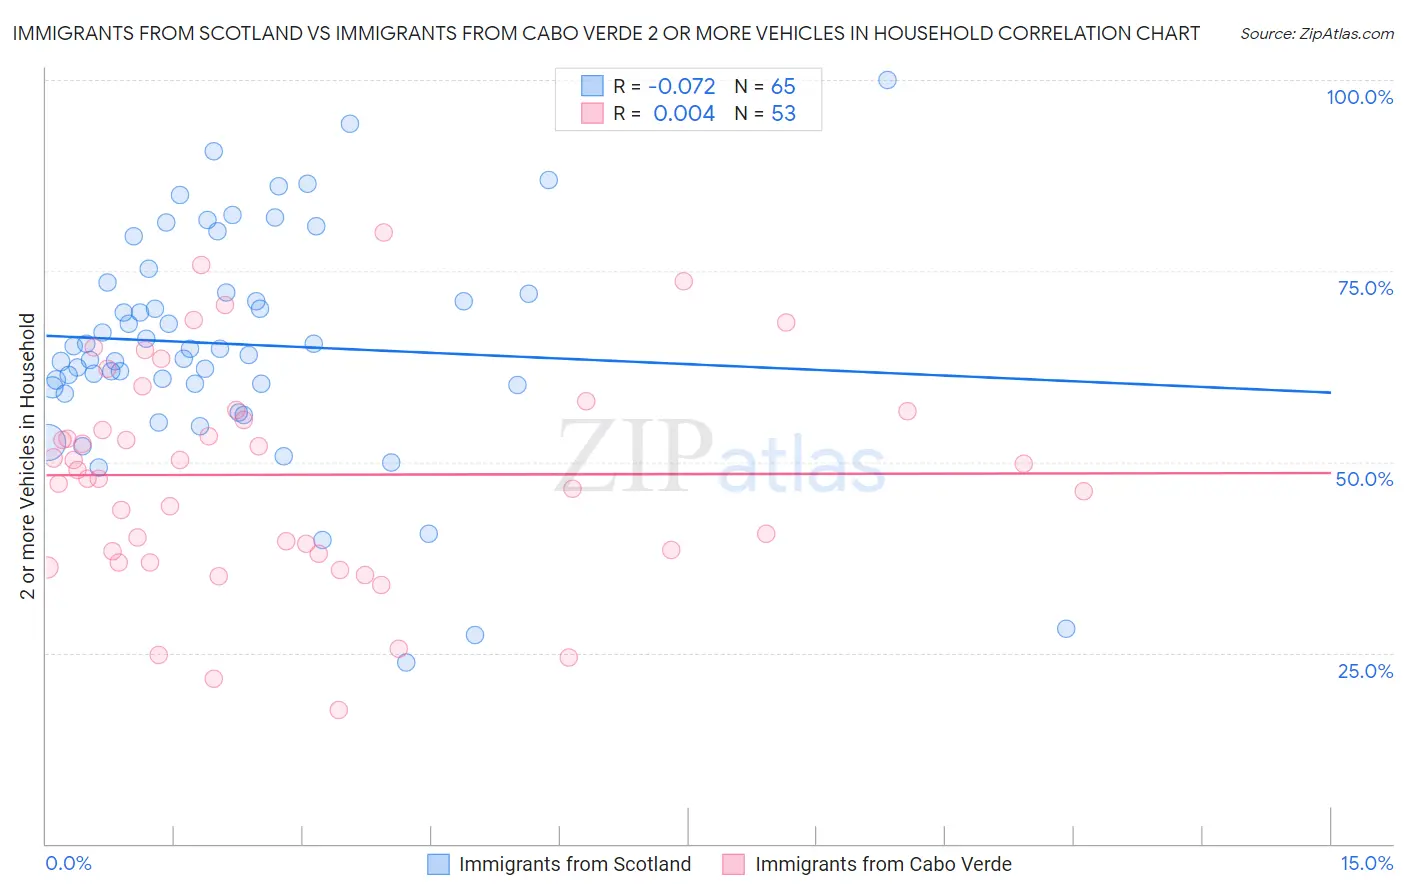 Immigrants from Scotland vs Immigrants from Cabo Verde 2 or more Vehicles in Household